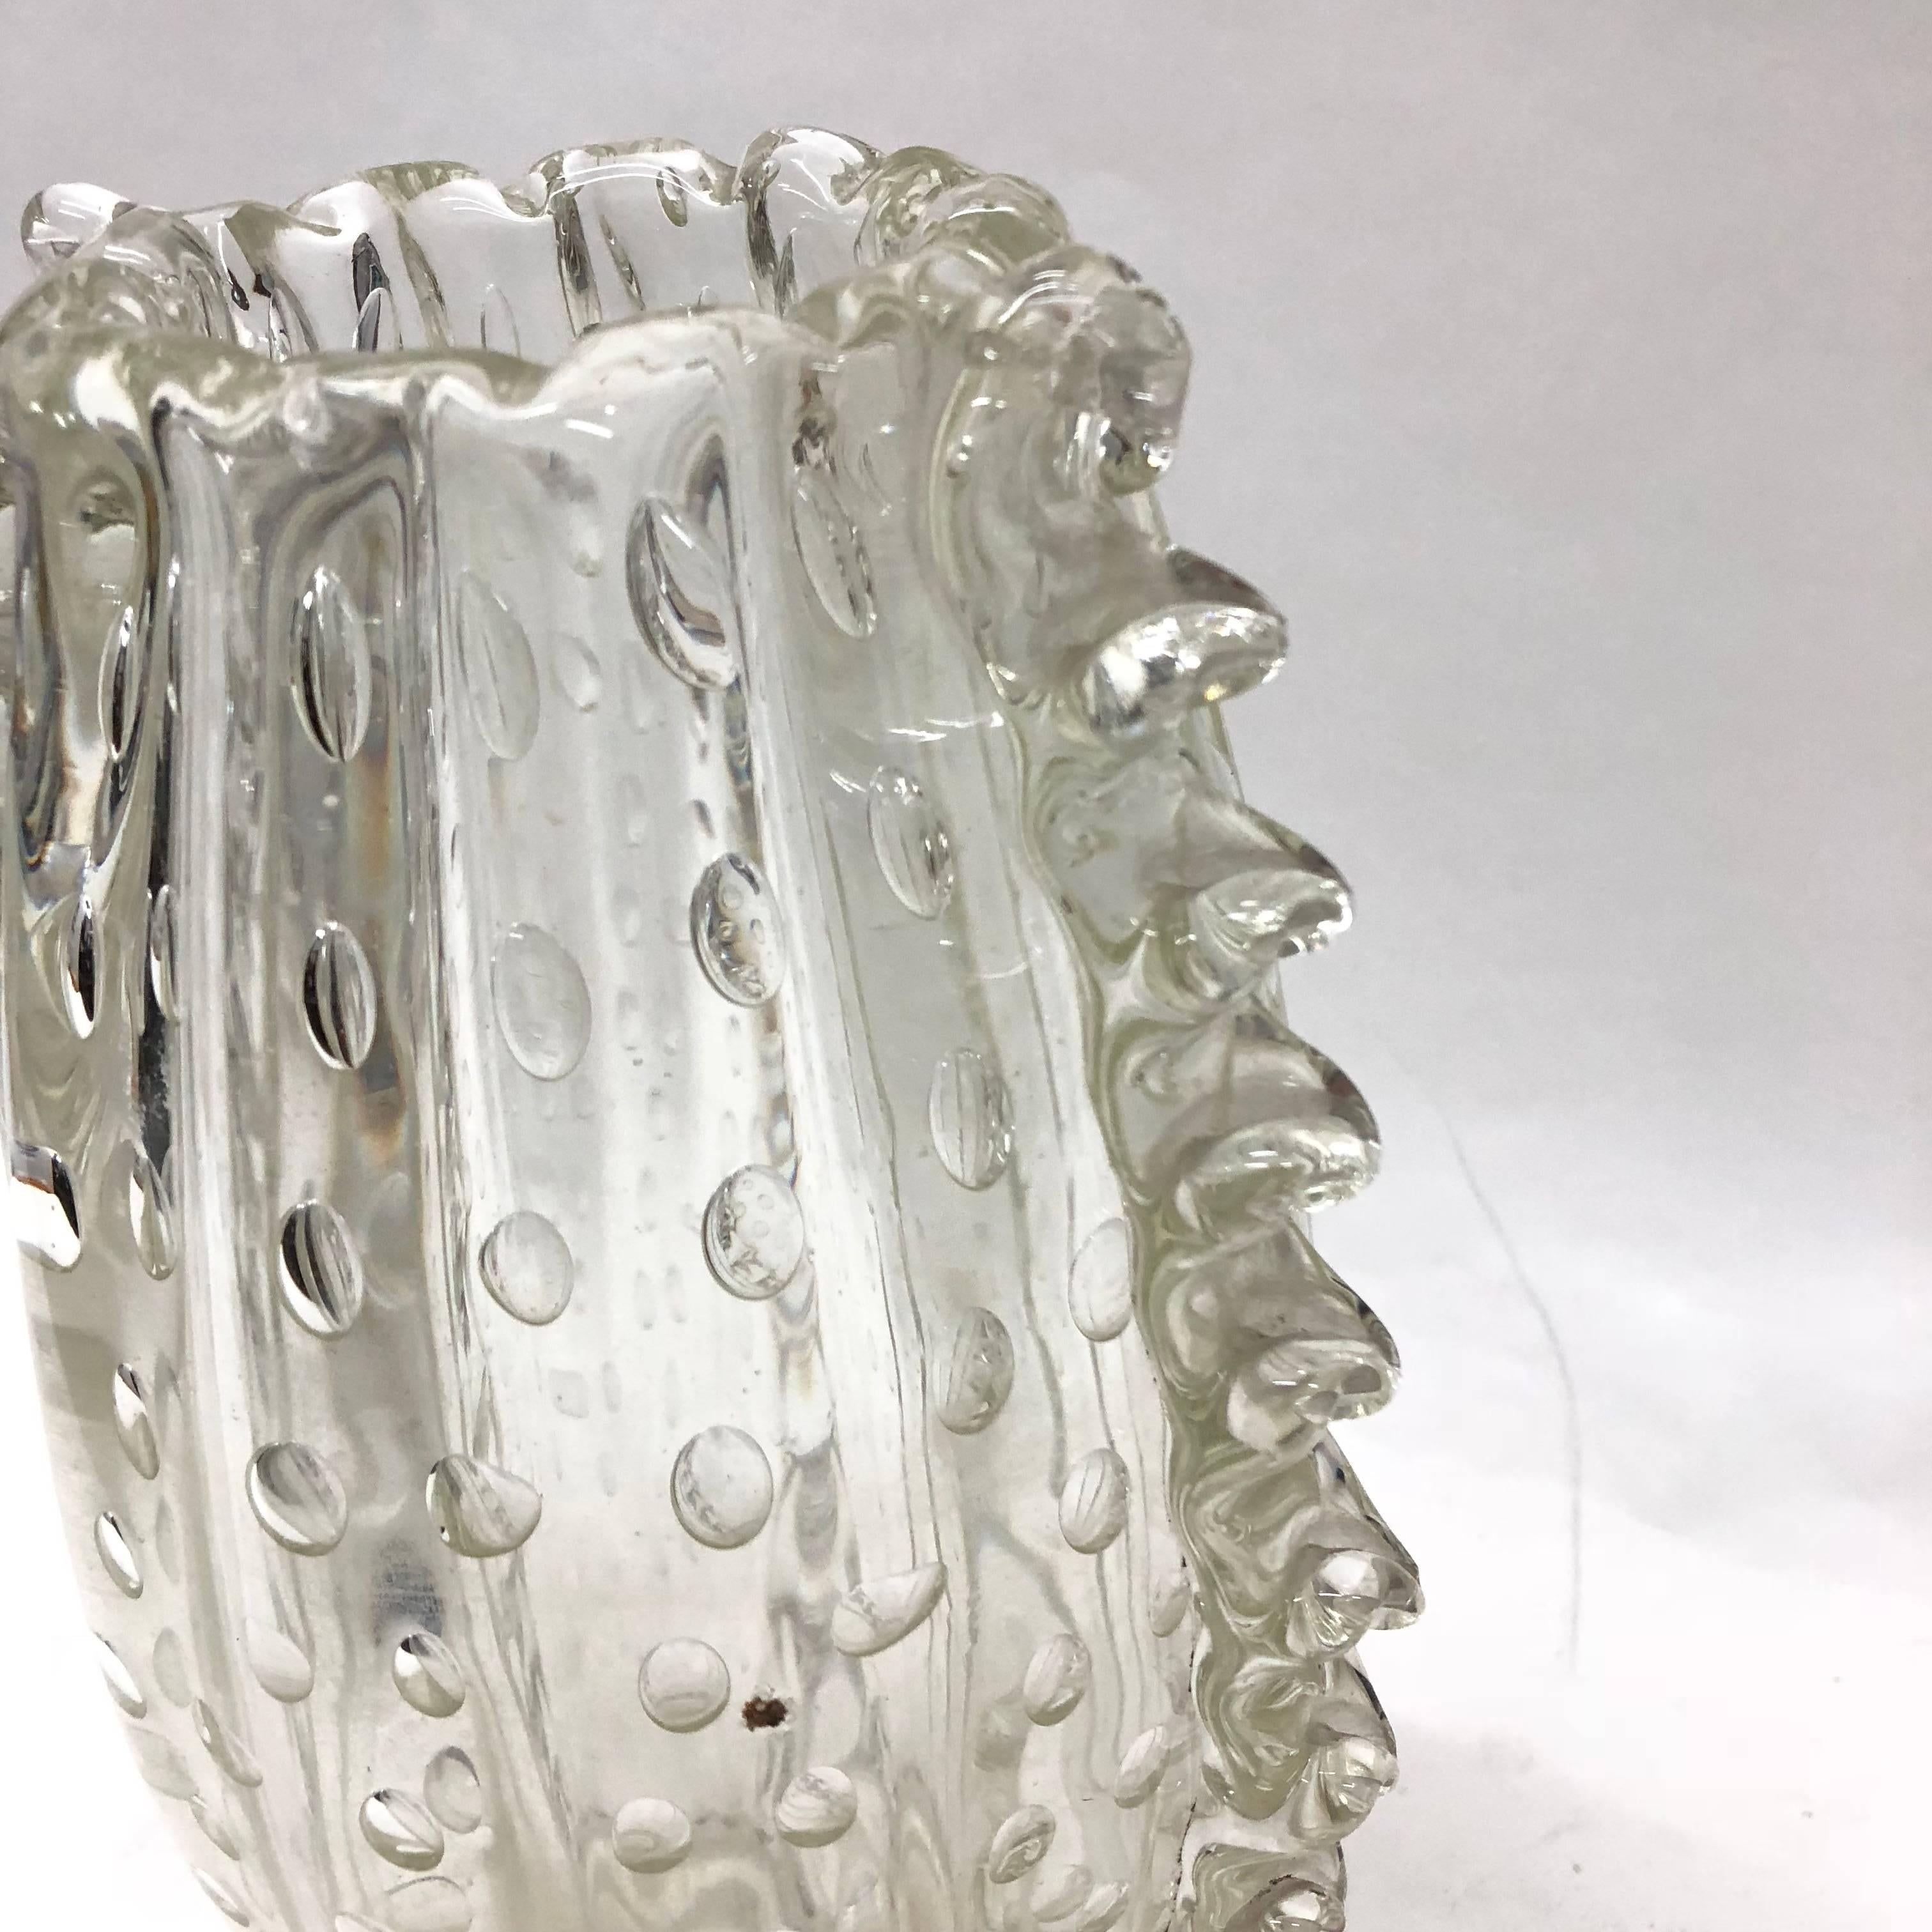 A Mid-Century Modern translucent Murano glass vase made in Italy by Barovier in perfect conditions.